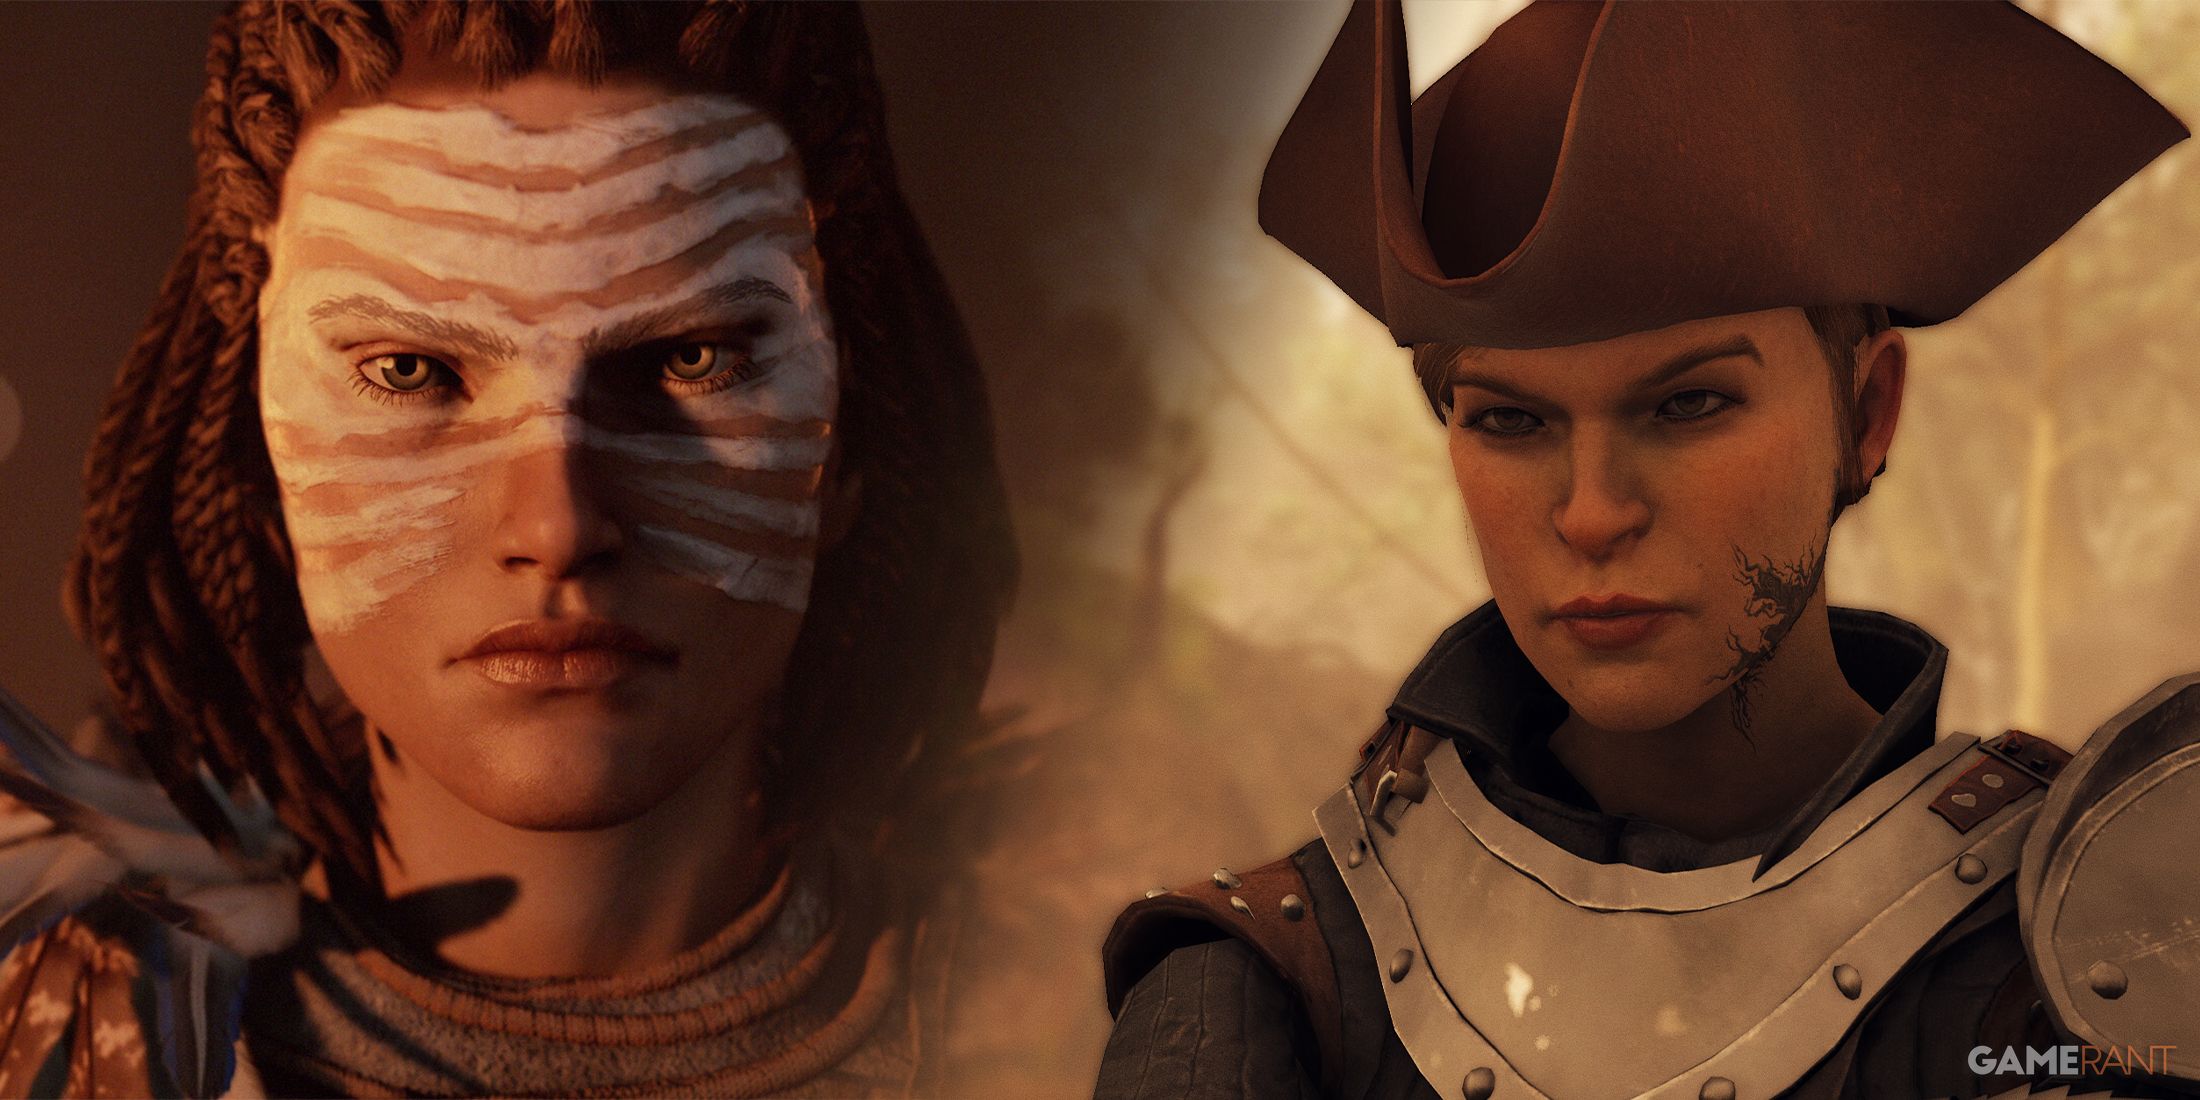 GreedFall 2's protagonist and De Sardet